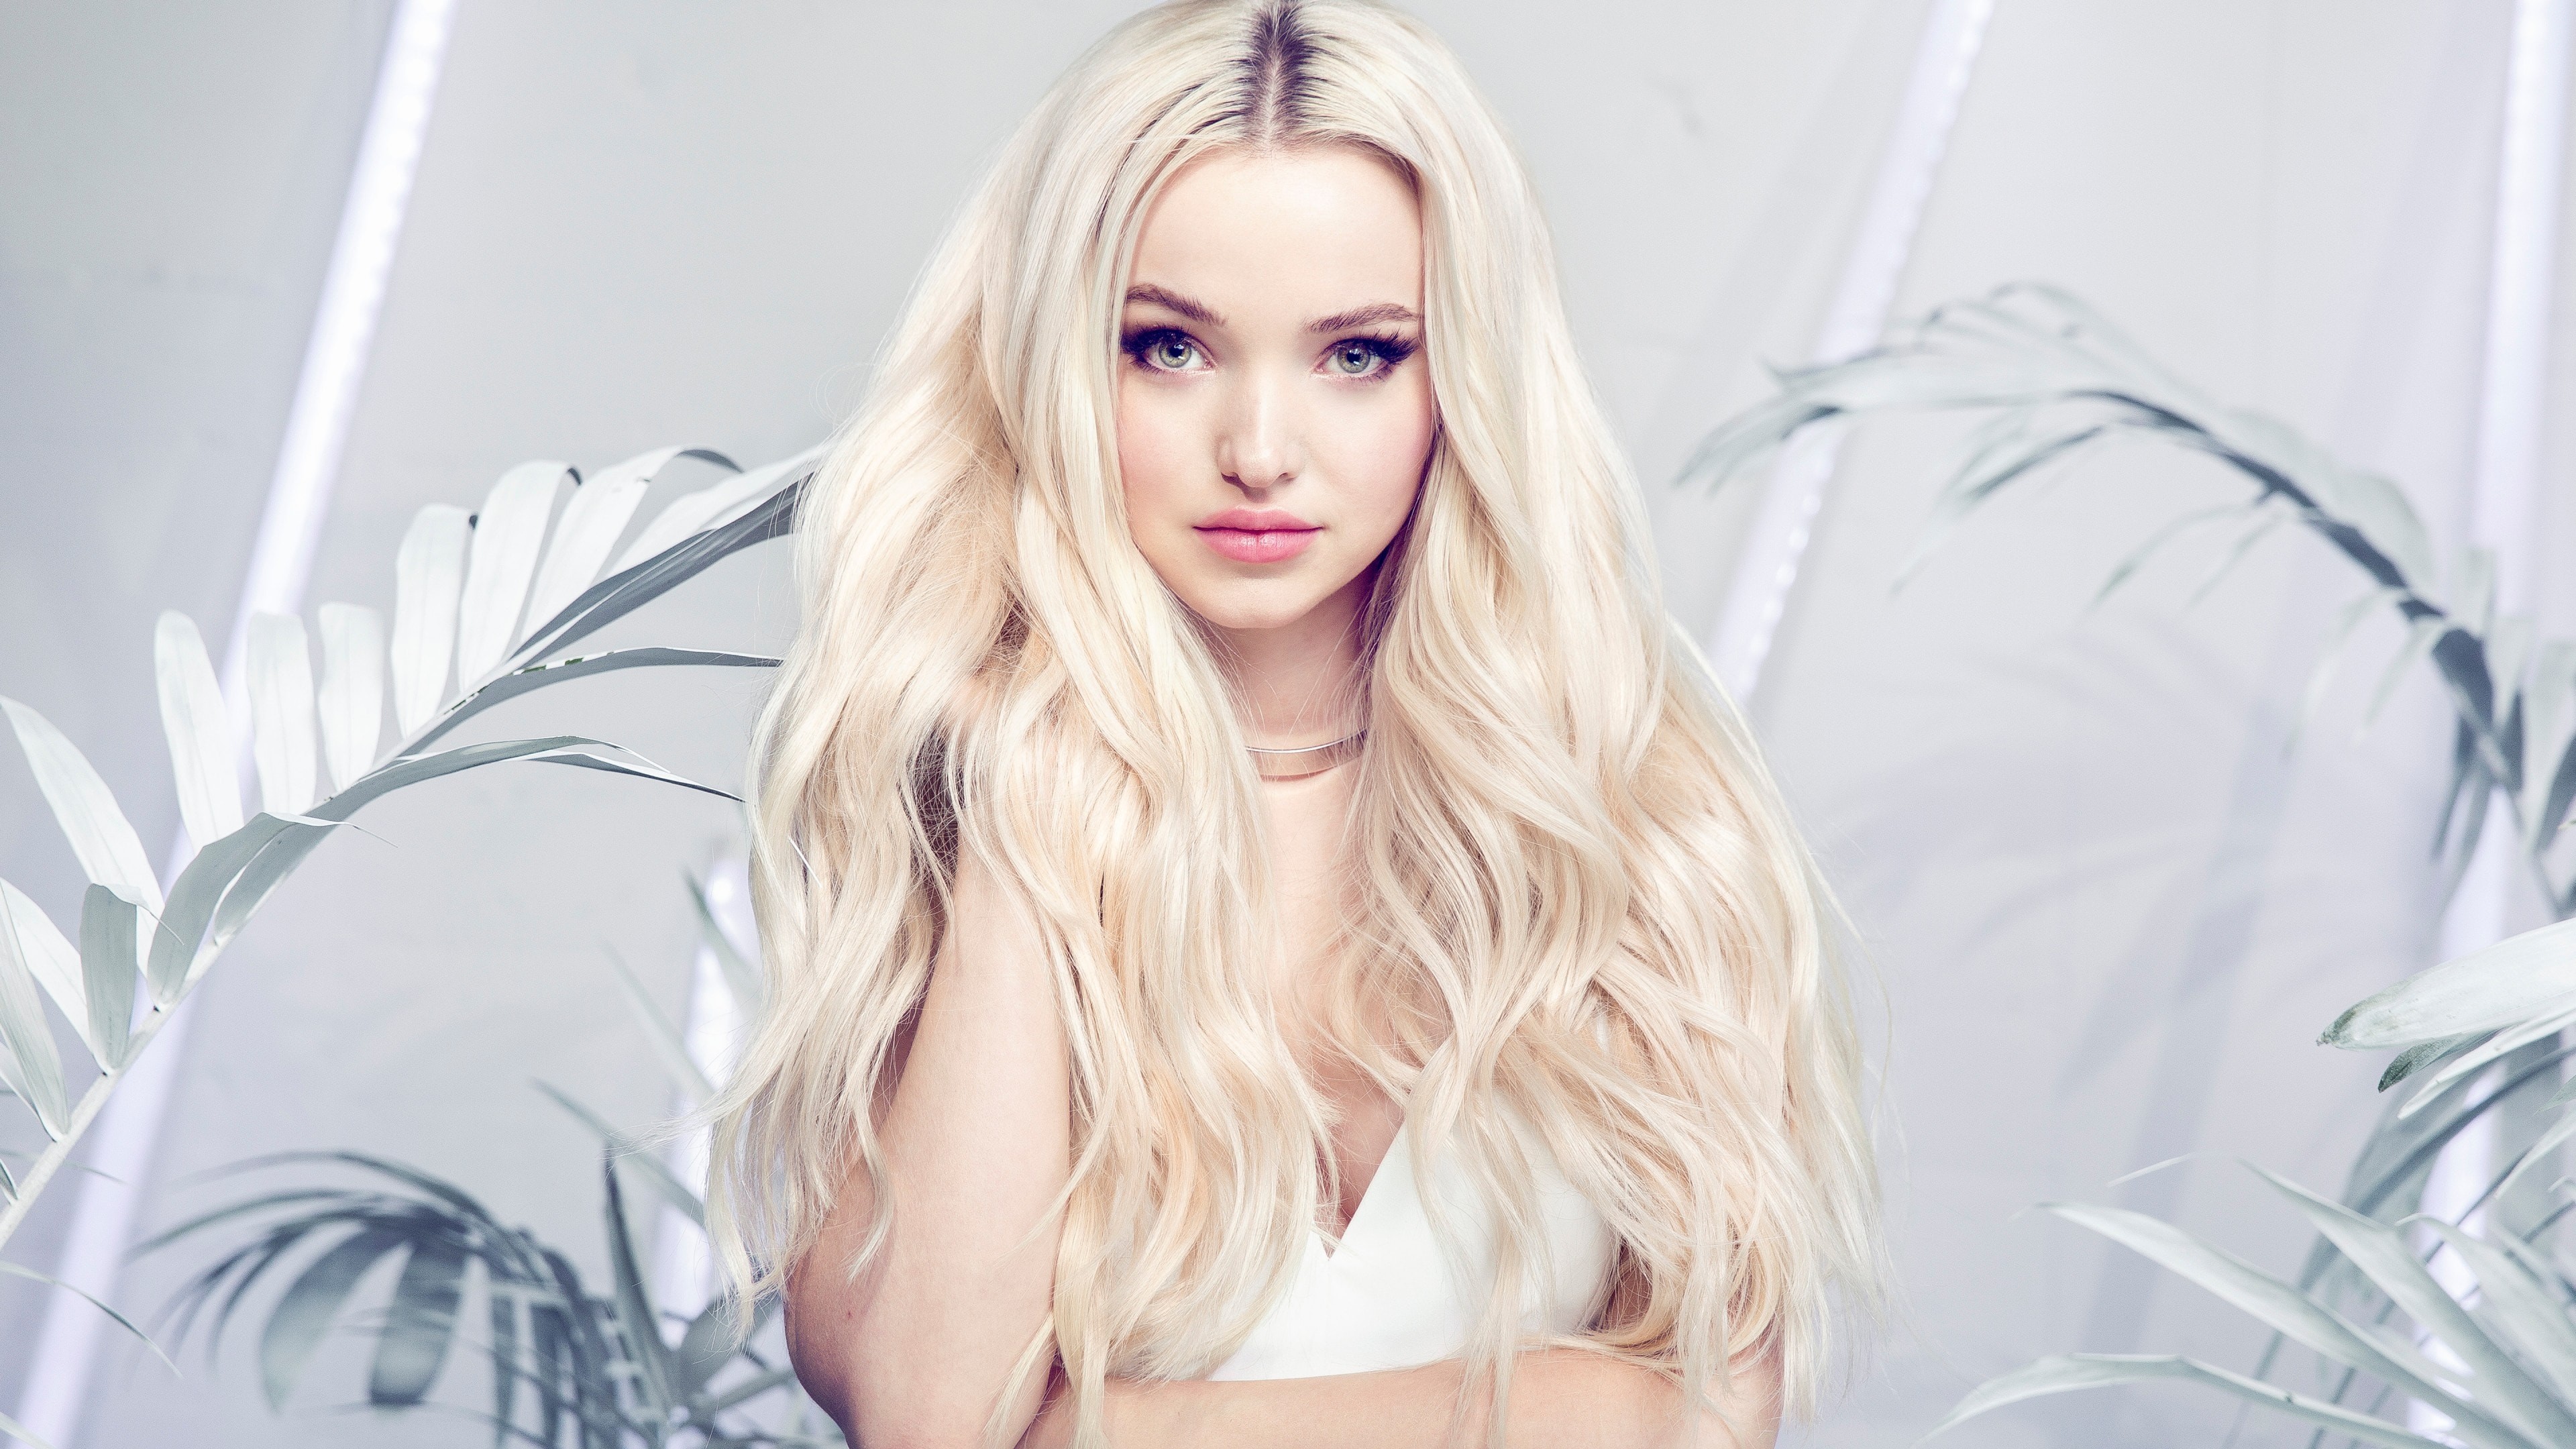 3840x2160 Dove Cameron American Actress 4K - Image #3454 - Licence: Free for Personal  Use